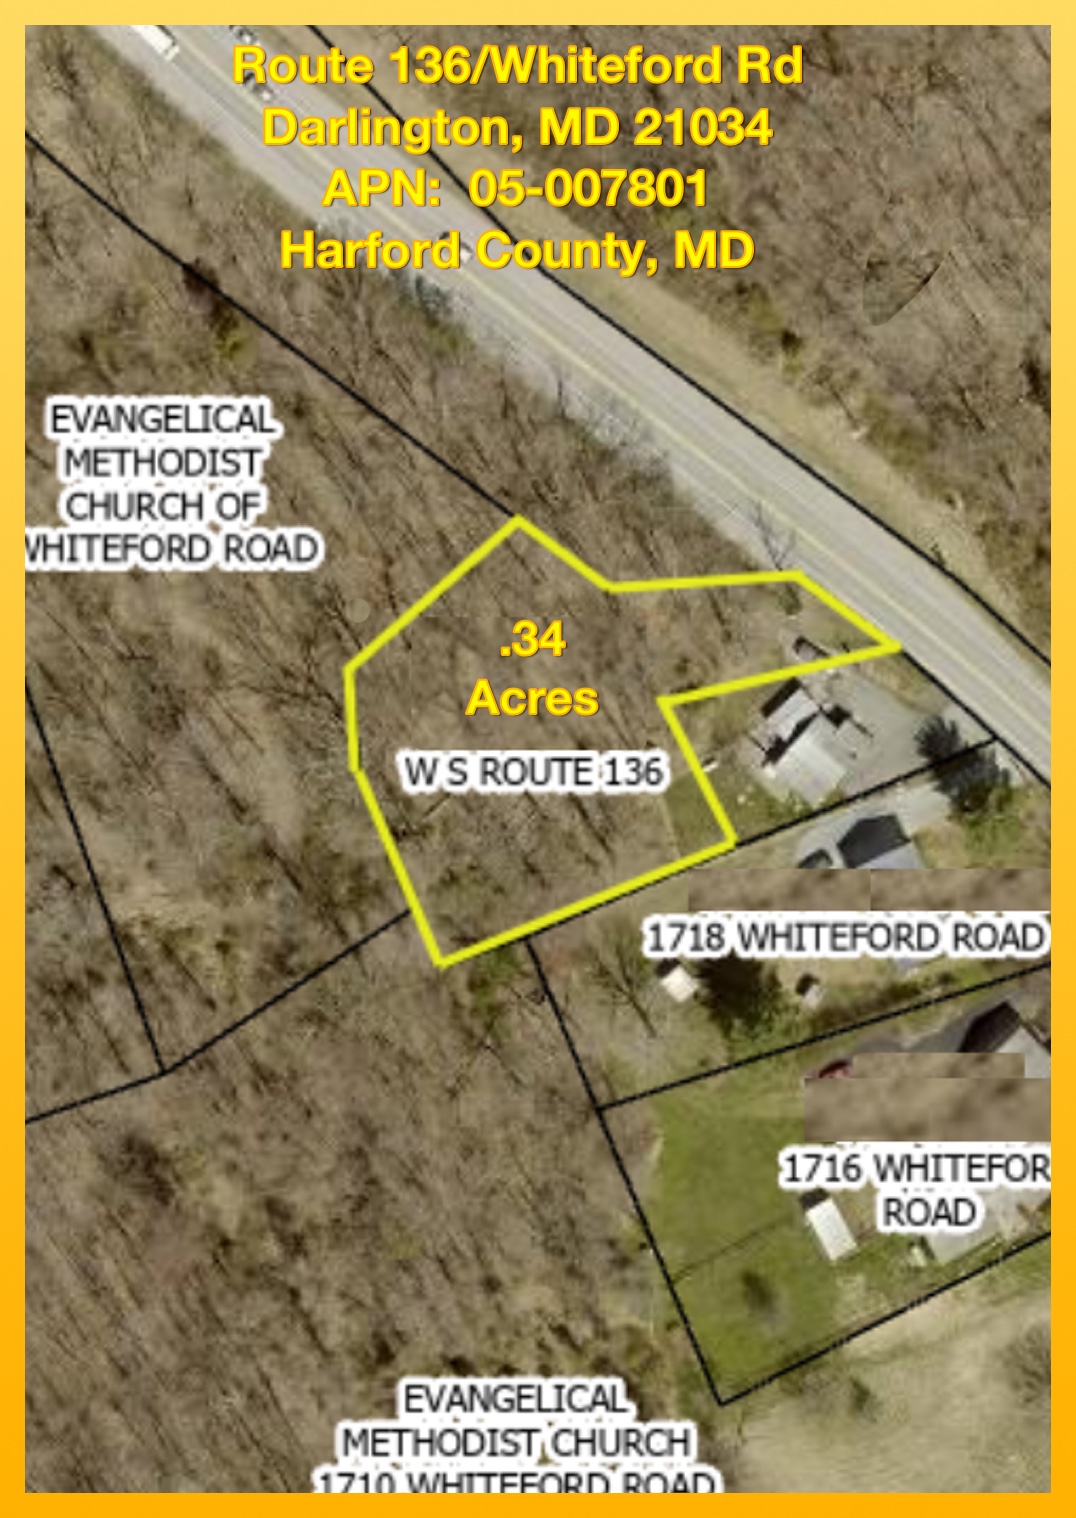 .34 Acres in Harford County, MD (Darlington)